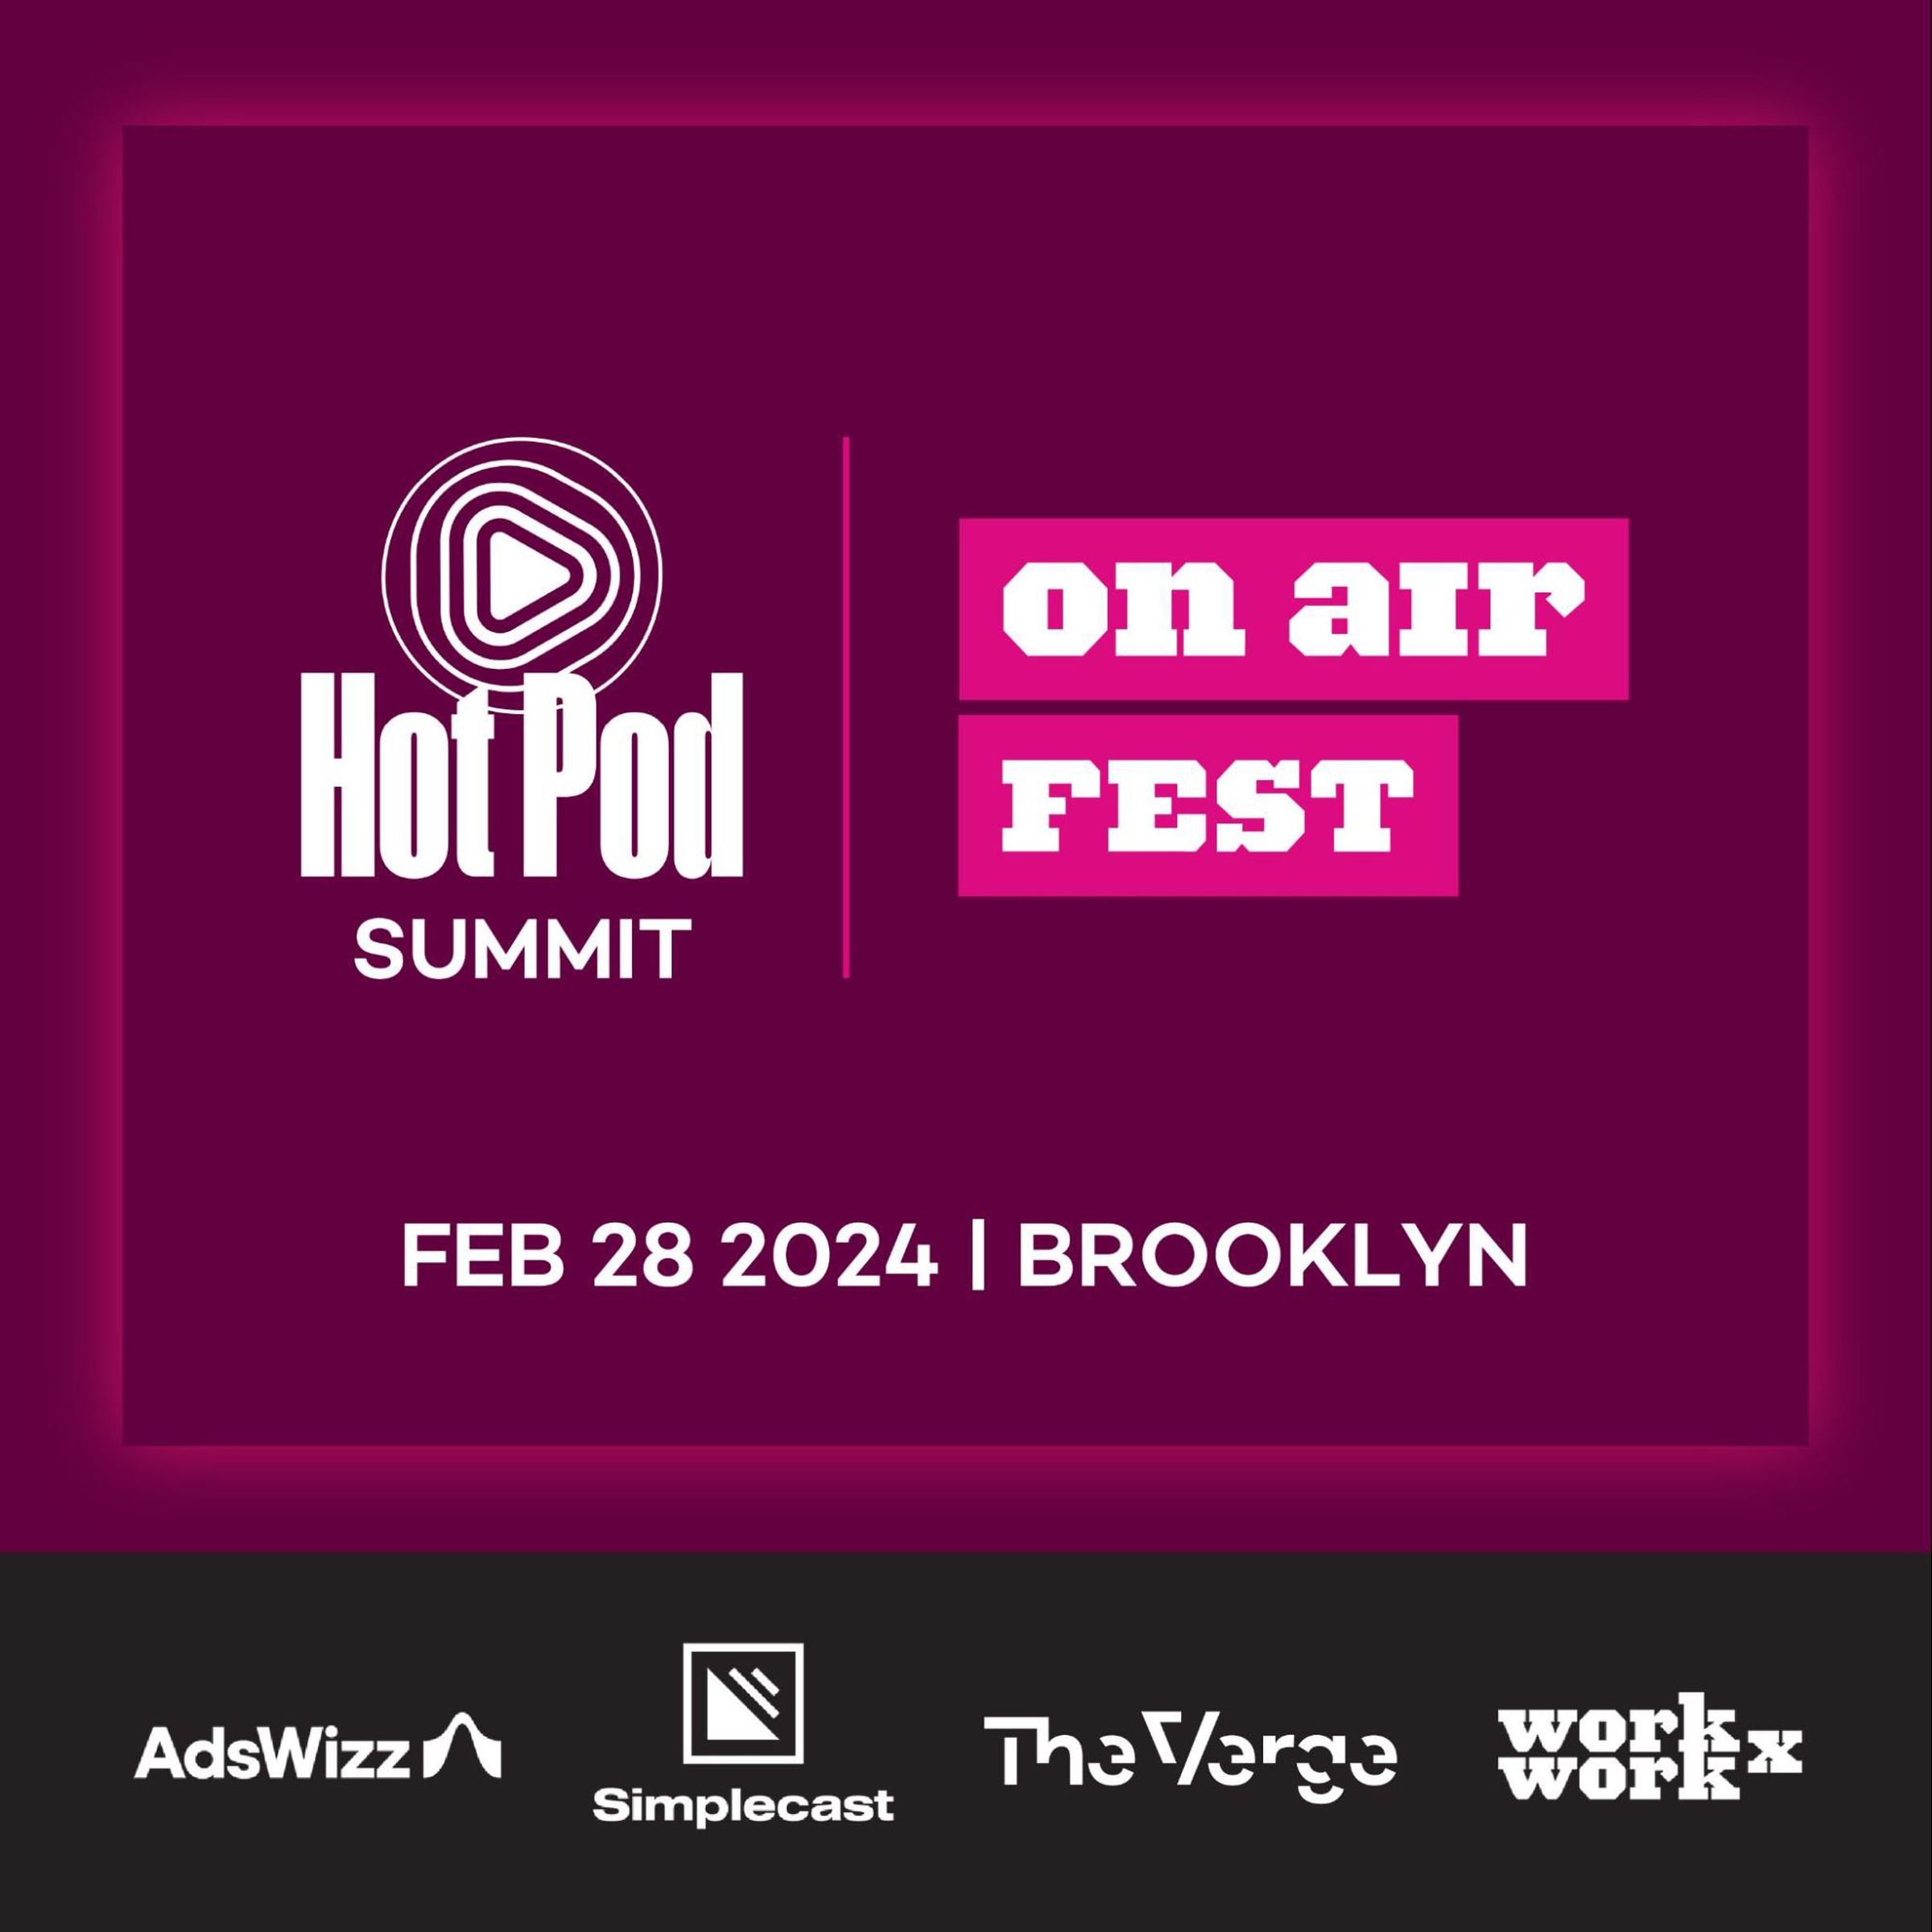 A promotional image for Hot Pod Summit at On Air Fest. It says the event is held February 28th, 2024 in Brooklyn, NY.